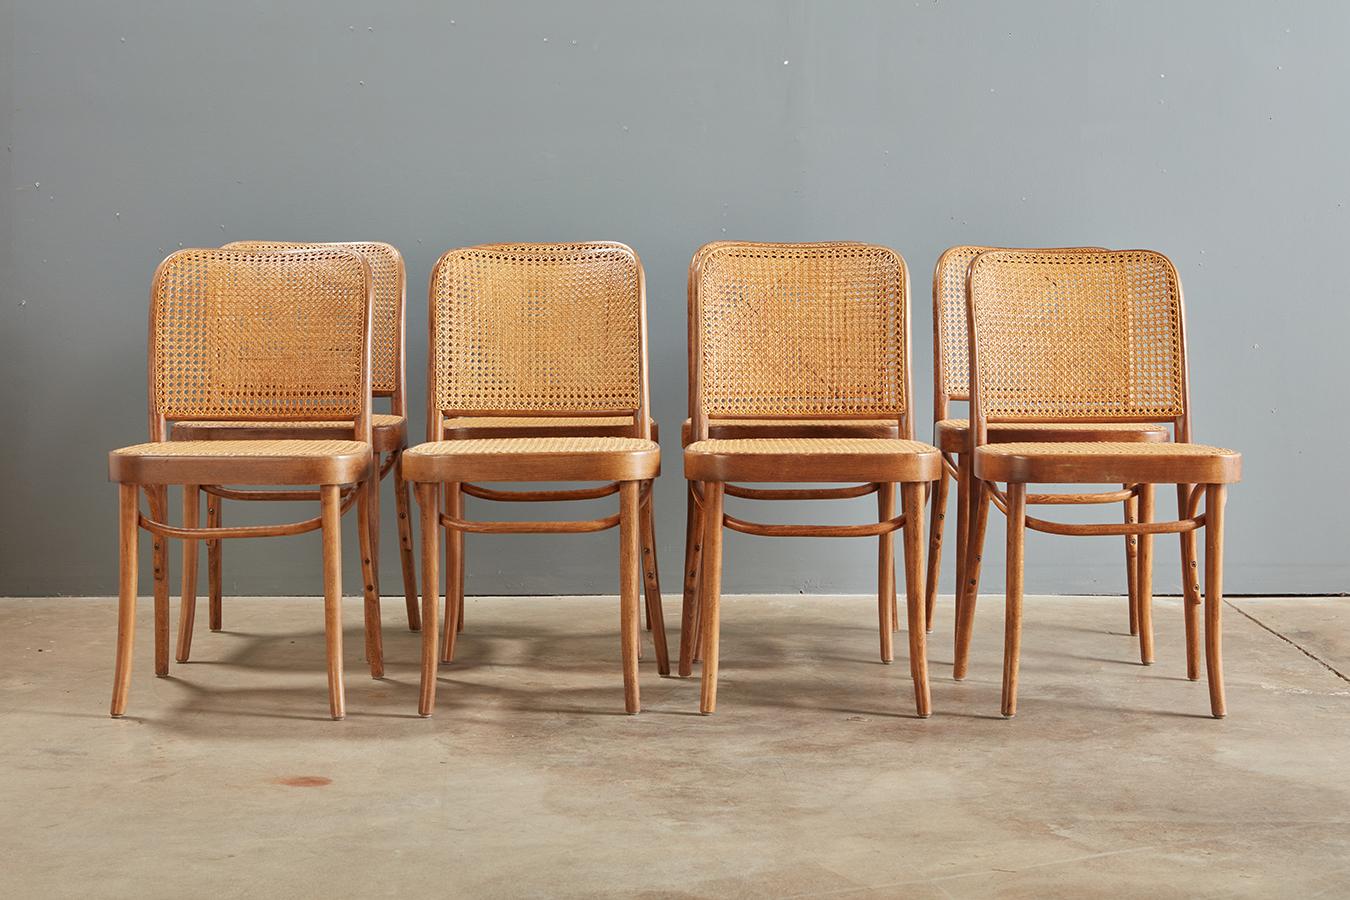 20th Century Josef Hoffman Bentwood and Cane Prague Chair for Thonet, 8 available  For Sale